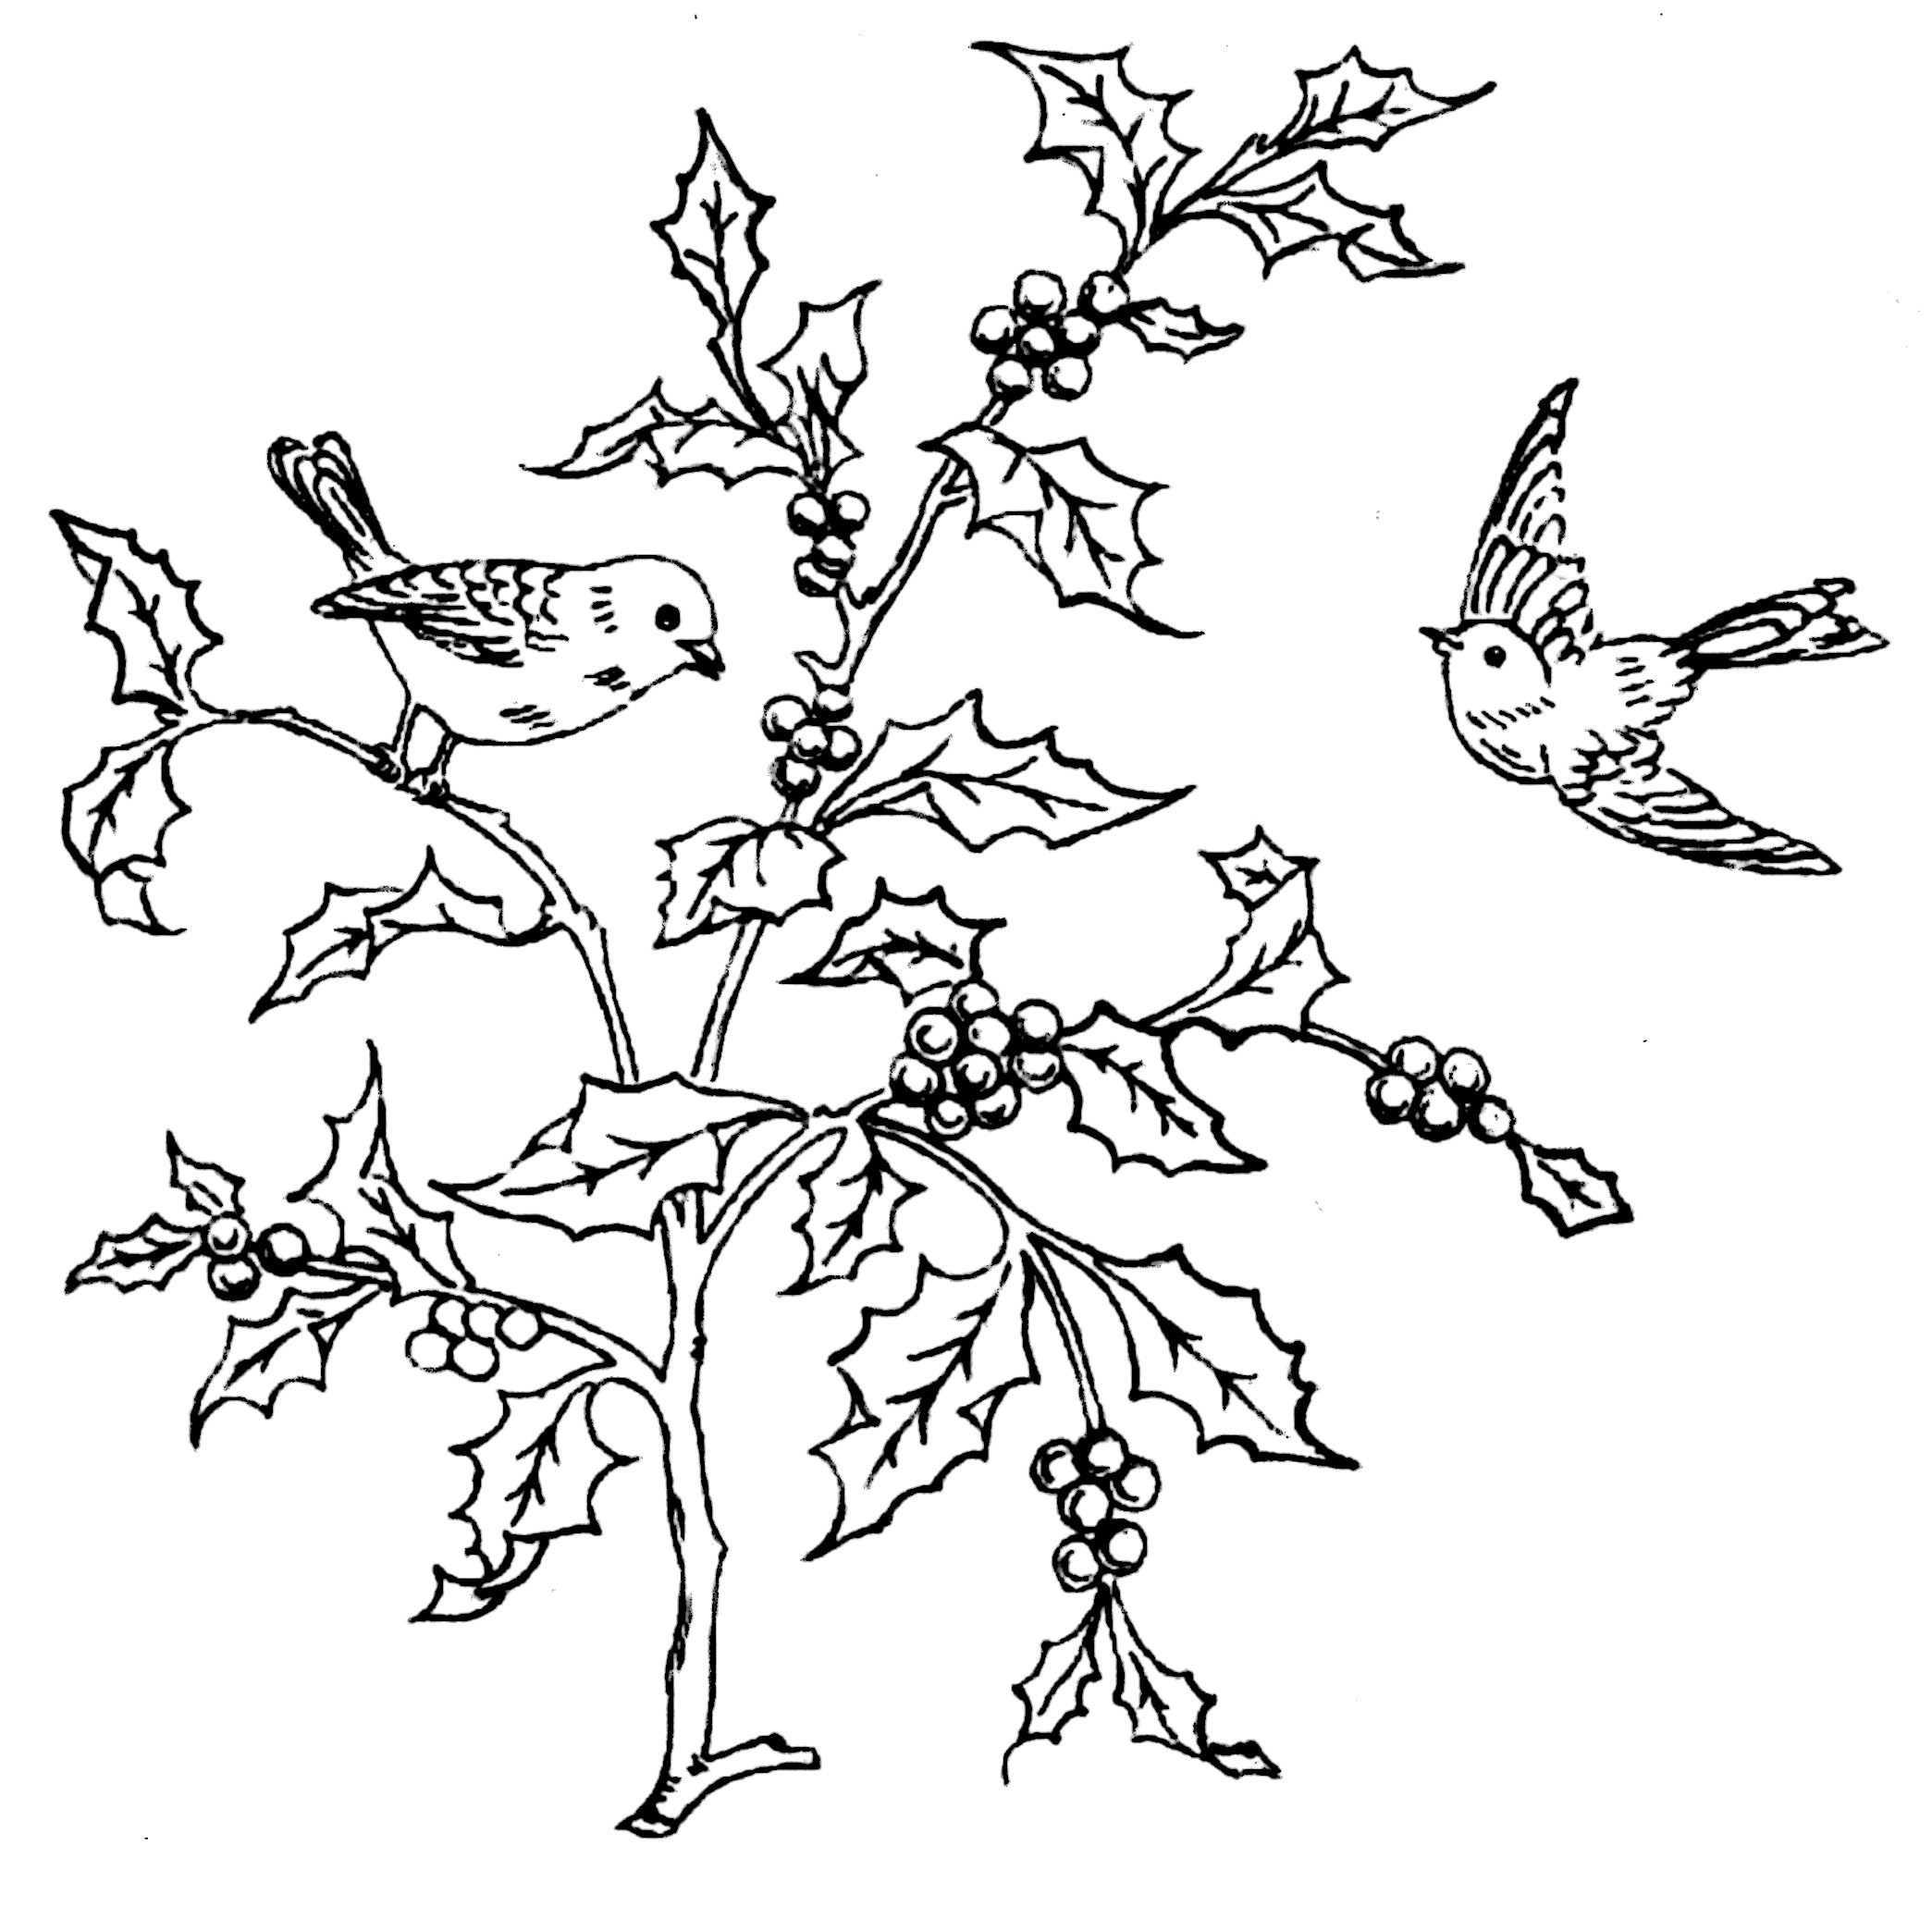 Transfer Embroidery Pattern Briggs Embroidery Transfer Pattern Birds And Holly Vintage Crafts